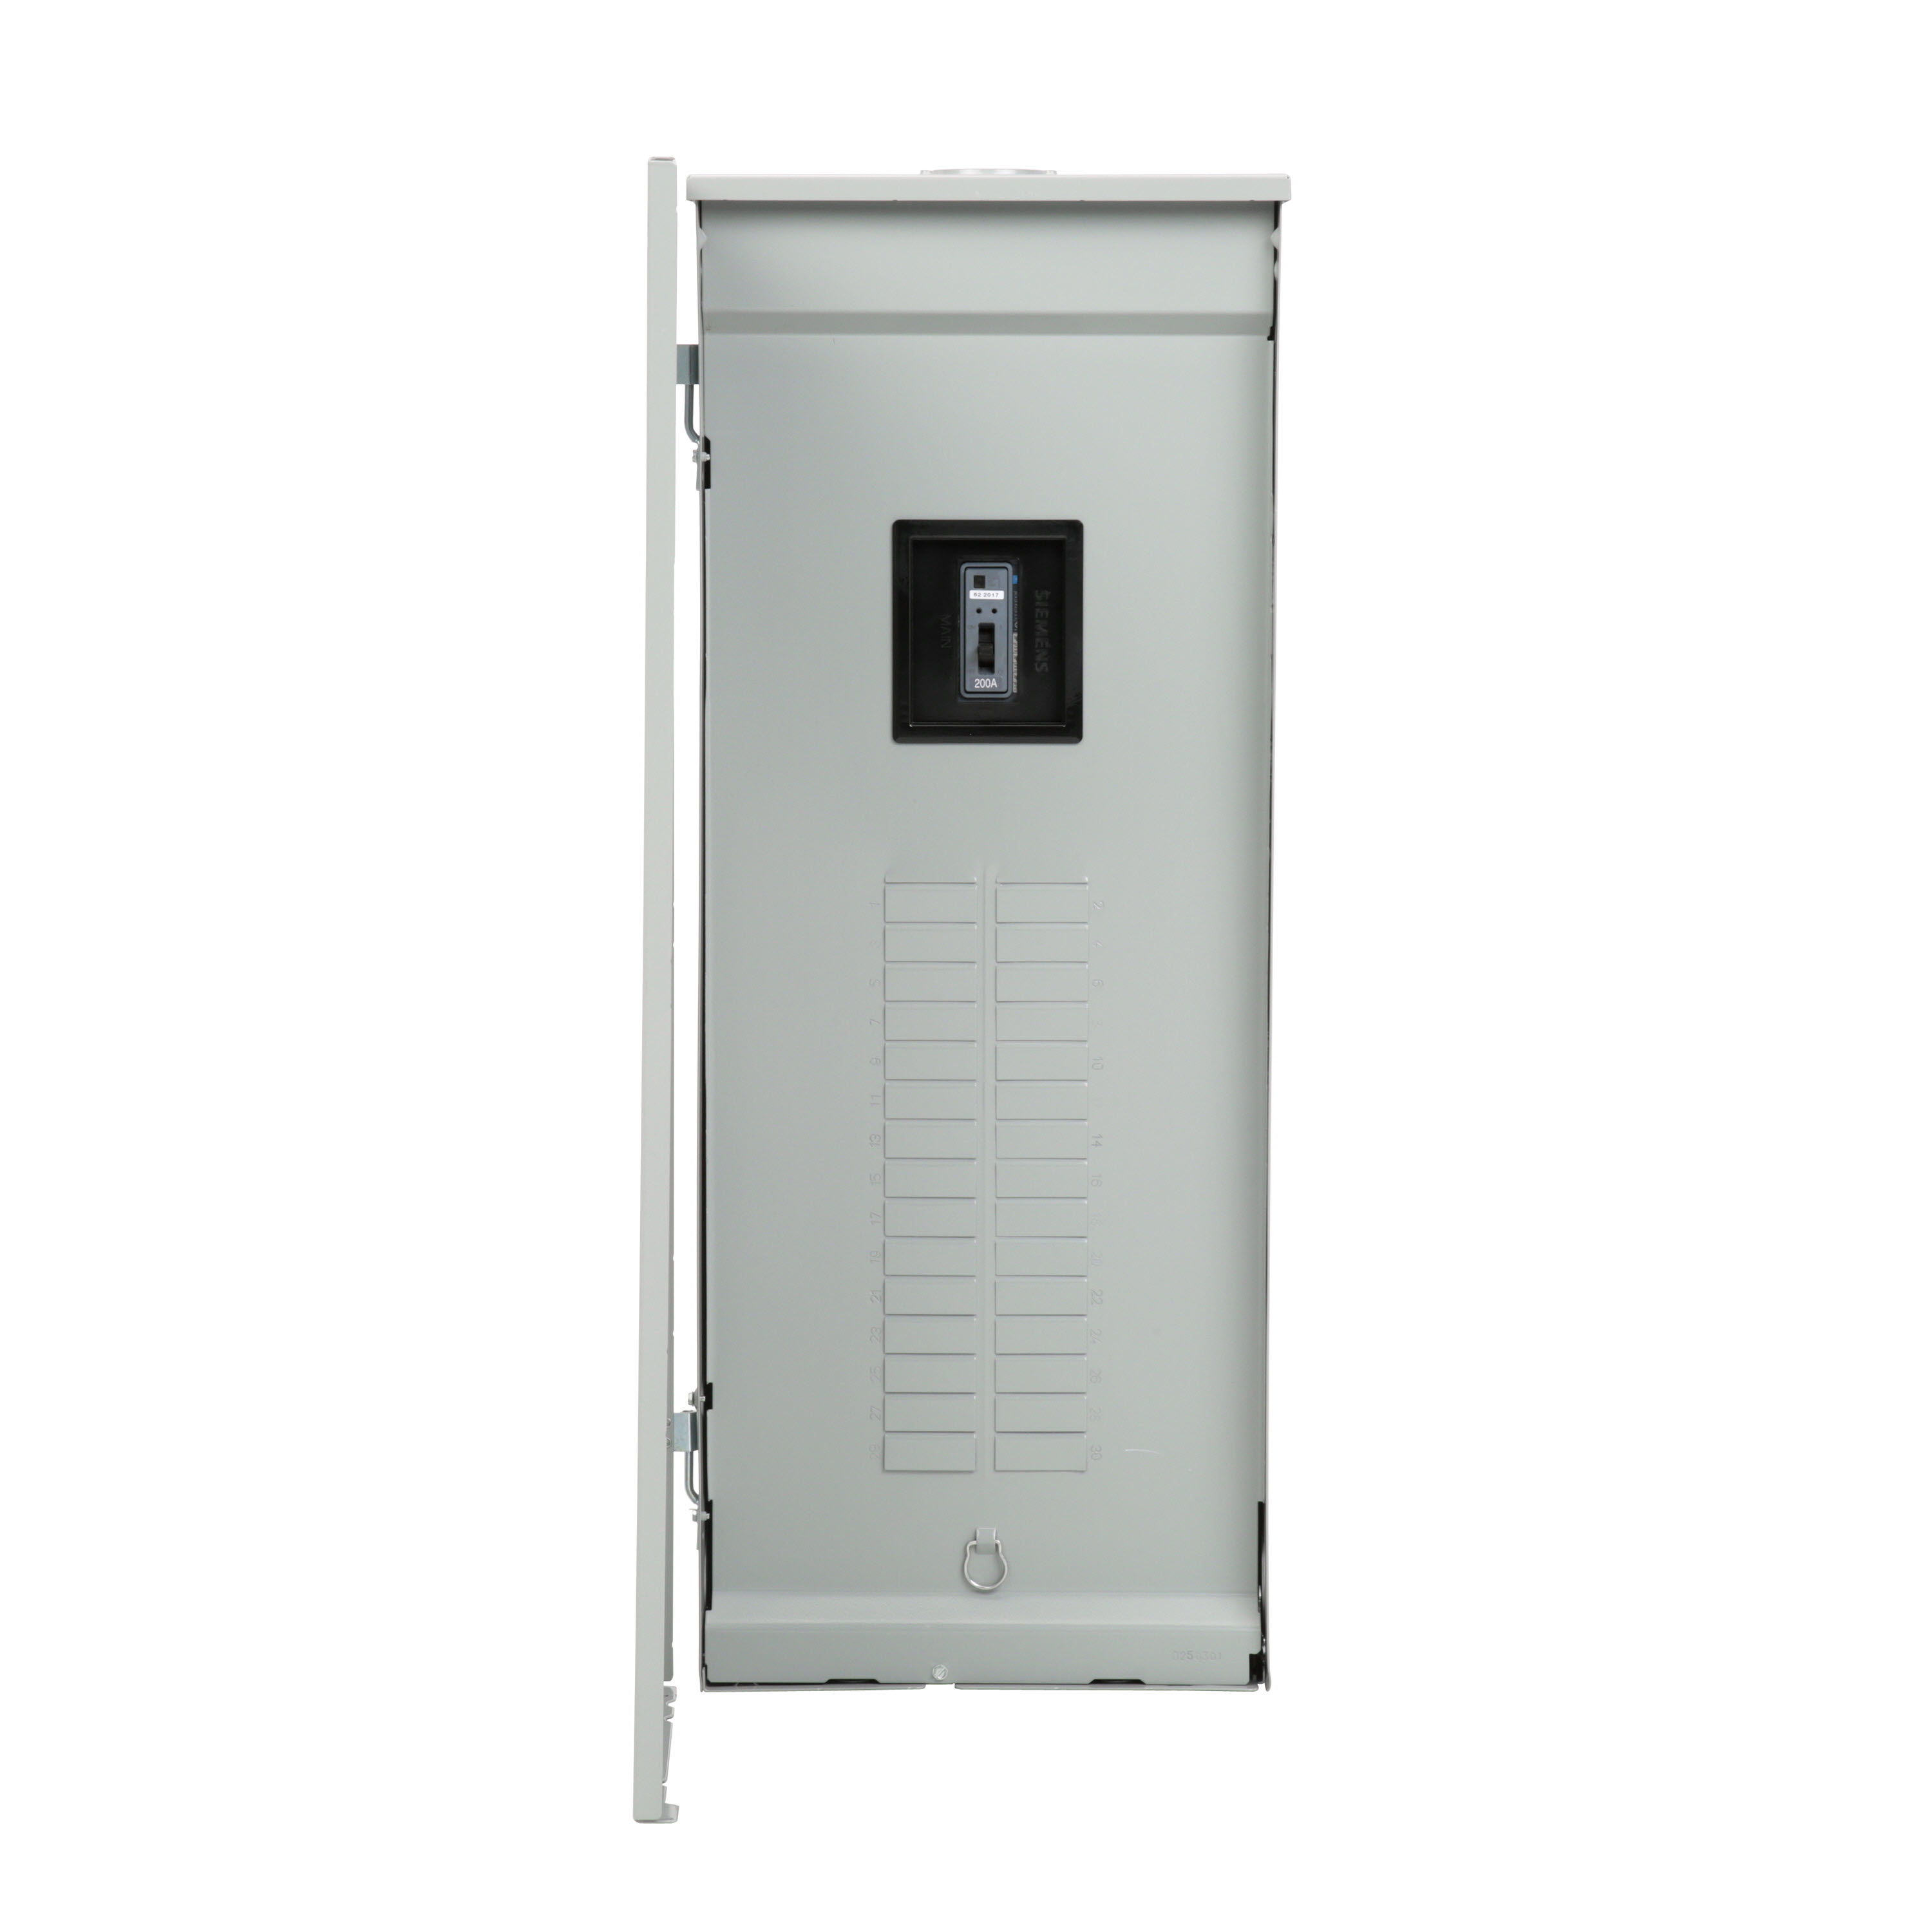 SIEMENS LOW VOLTAGE ES SERIES LOAD CENTER. FACTORY INSTALLED MAIN BREAKER WITH 30 1-INCH SPACES ALLOWING MAX 54 CIRCUITS. 3-PHASE 4-WIRE SYSTEM RATED 120/240V OR 120/208V (200A) 10KA INTERRUPT. SPECIAL FEATURES ALUMINUM BUS, GRAY TRIM, NEMA TYPE3R ENCLOSURE FOR OUTDOOR USE.